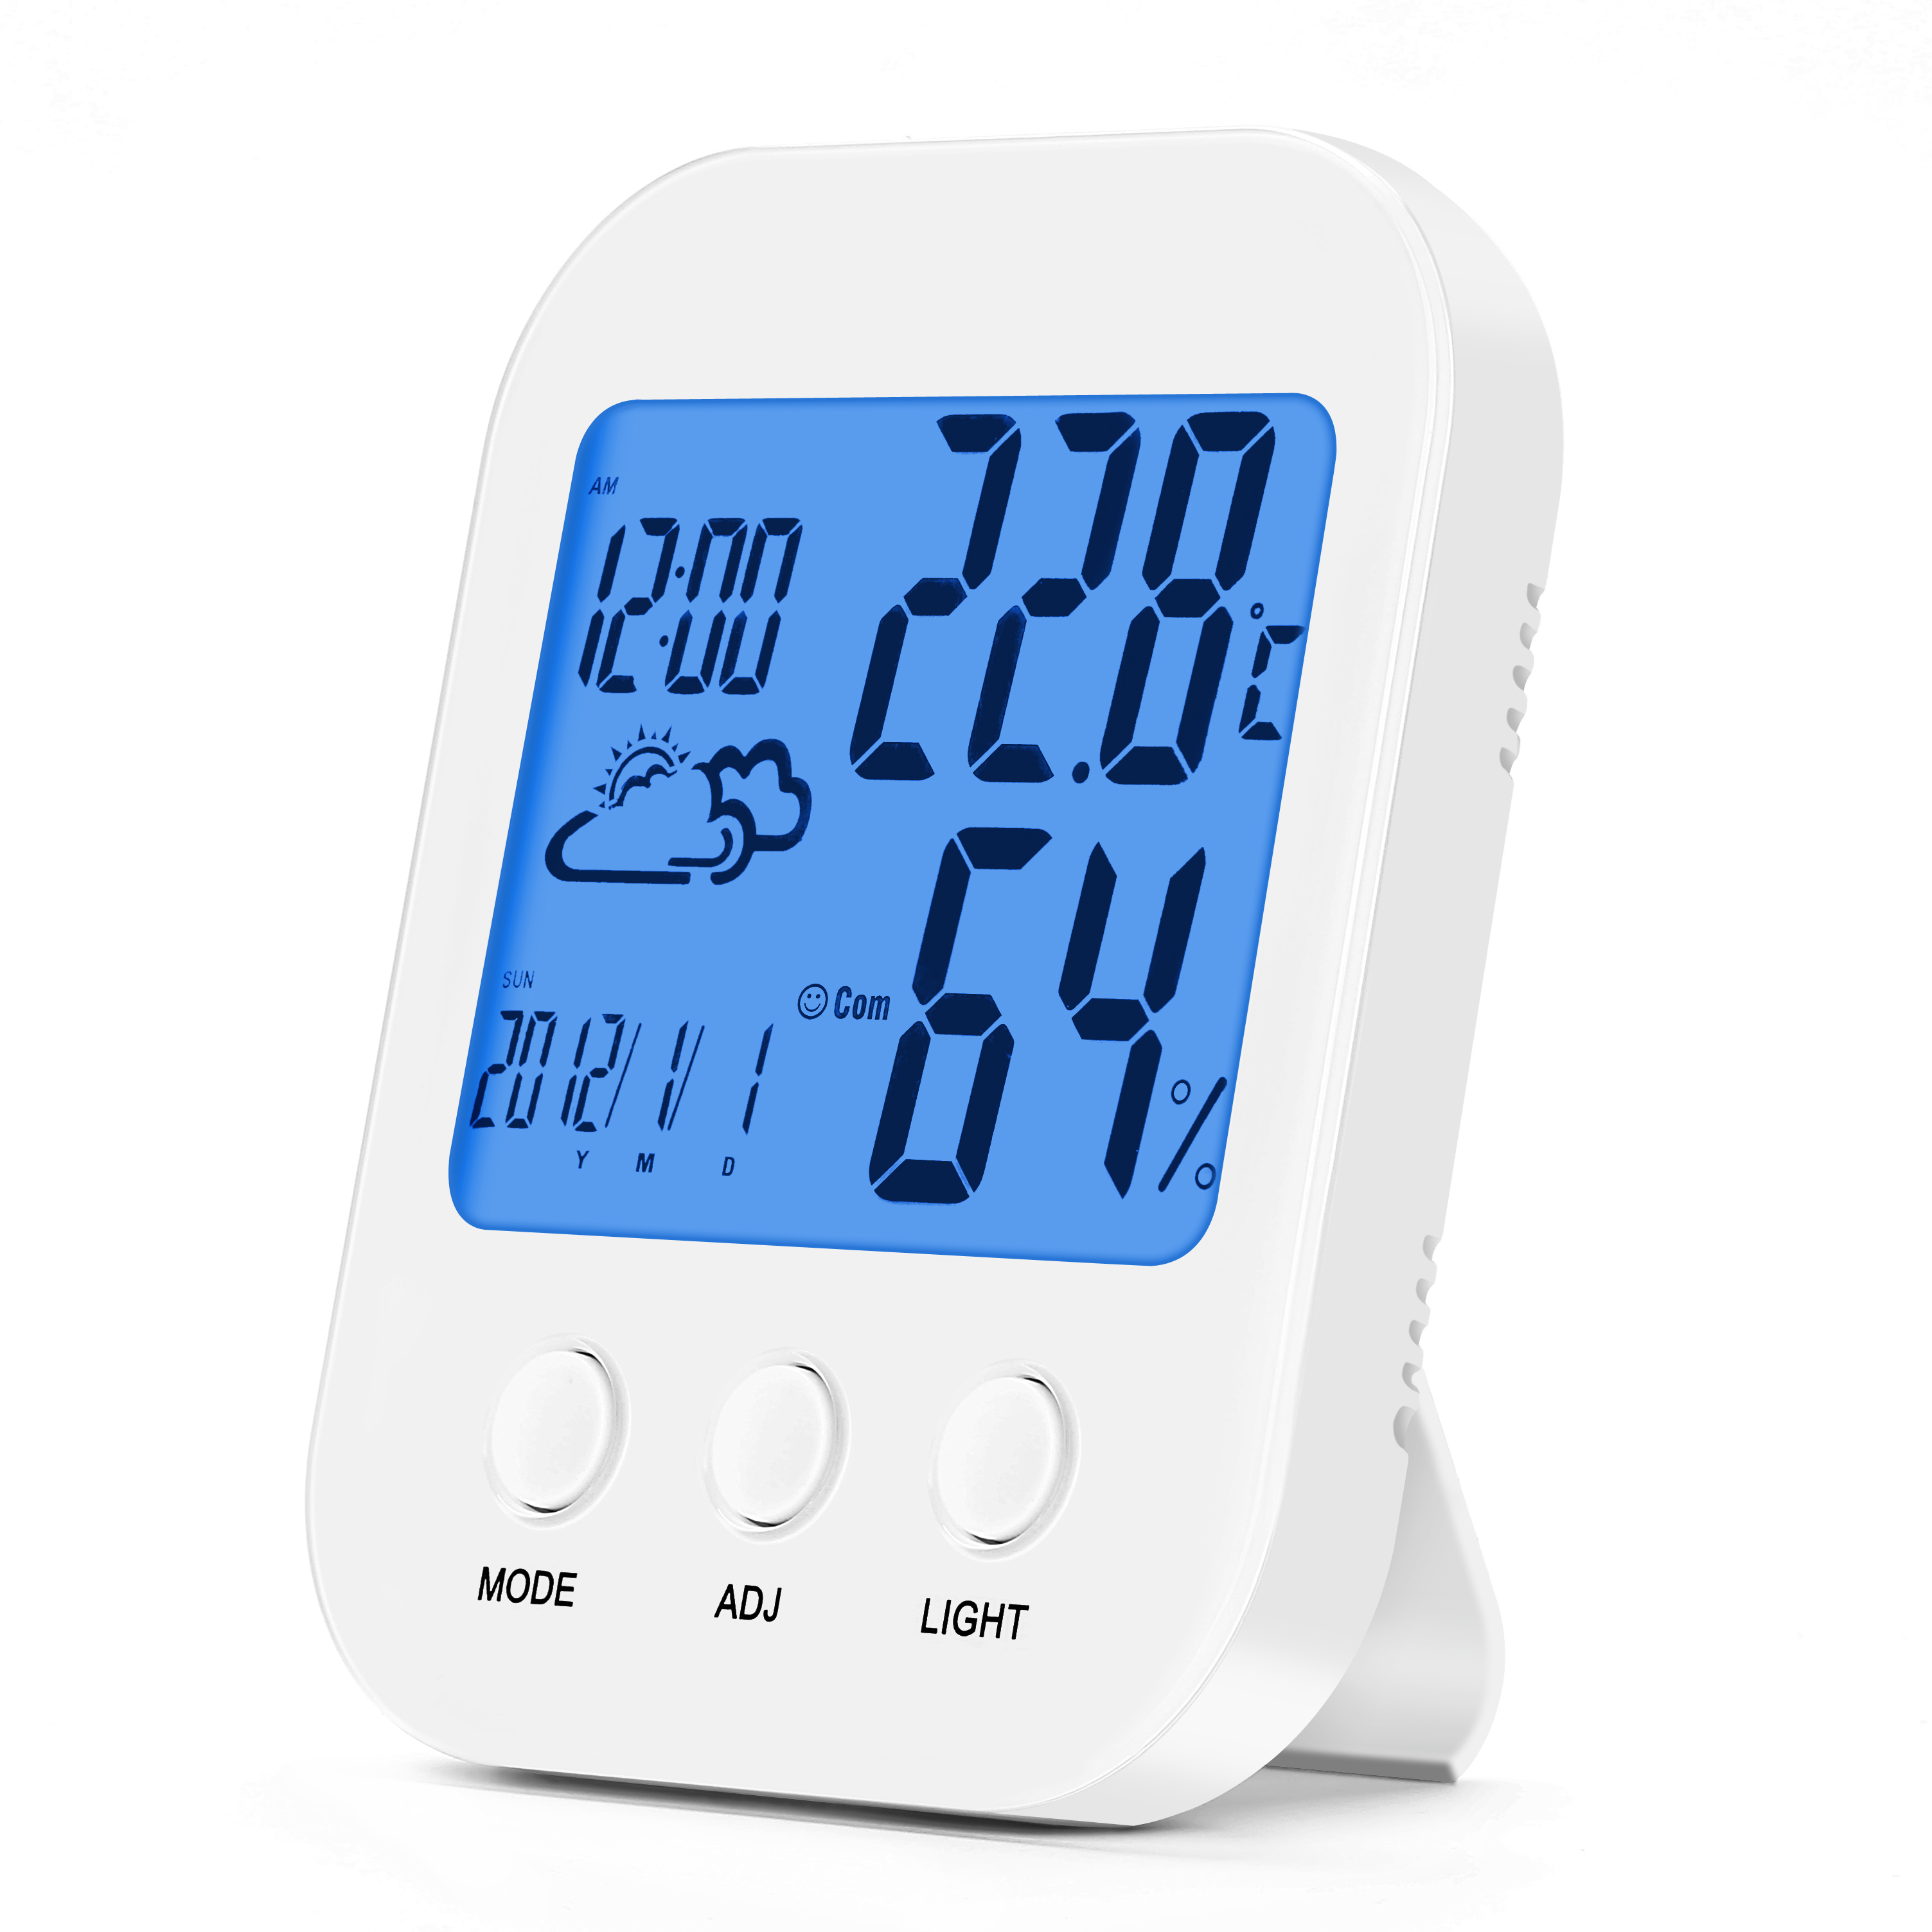 YH-TH202 Digital thermometer / hygrometer Humidity Meter Weather